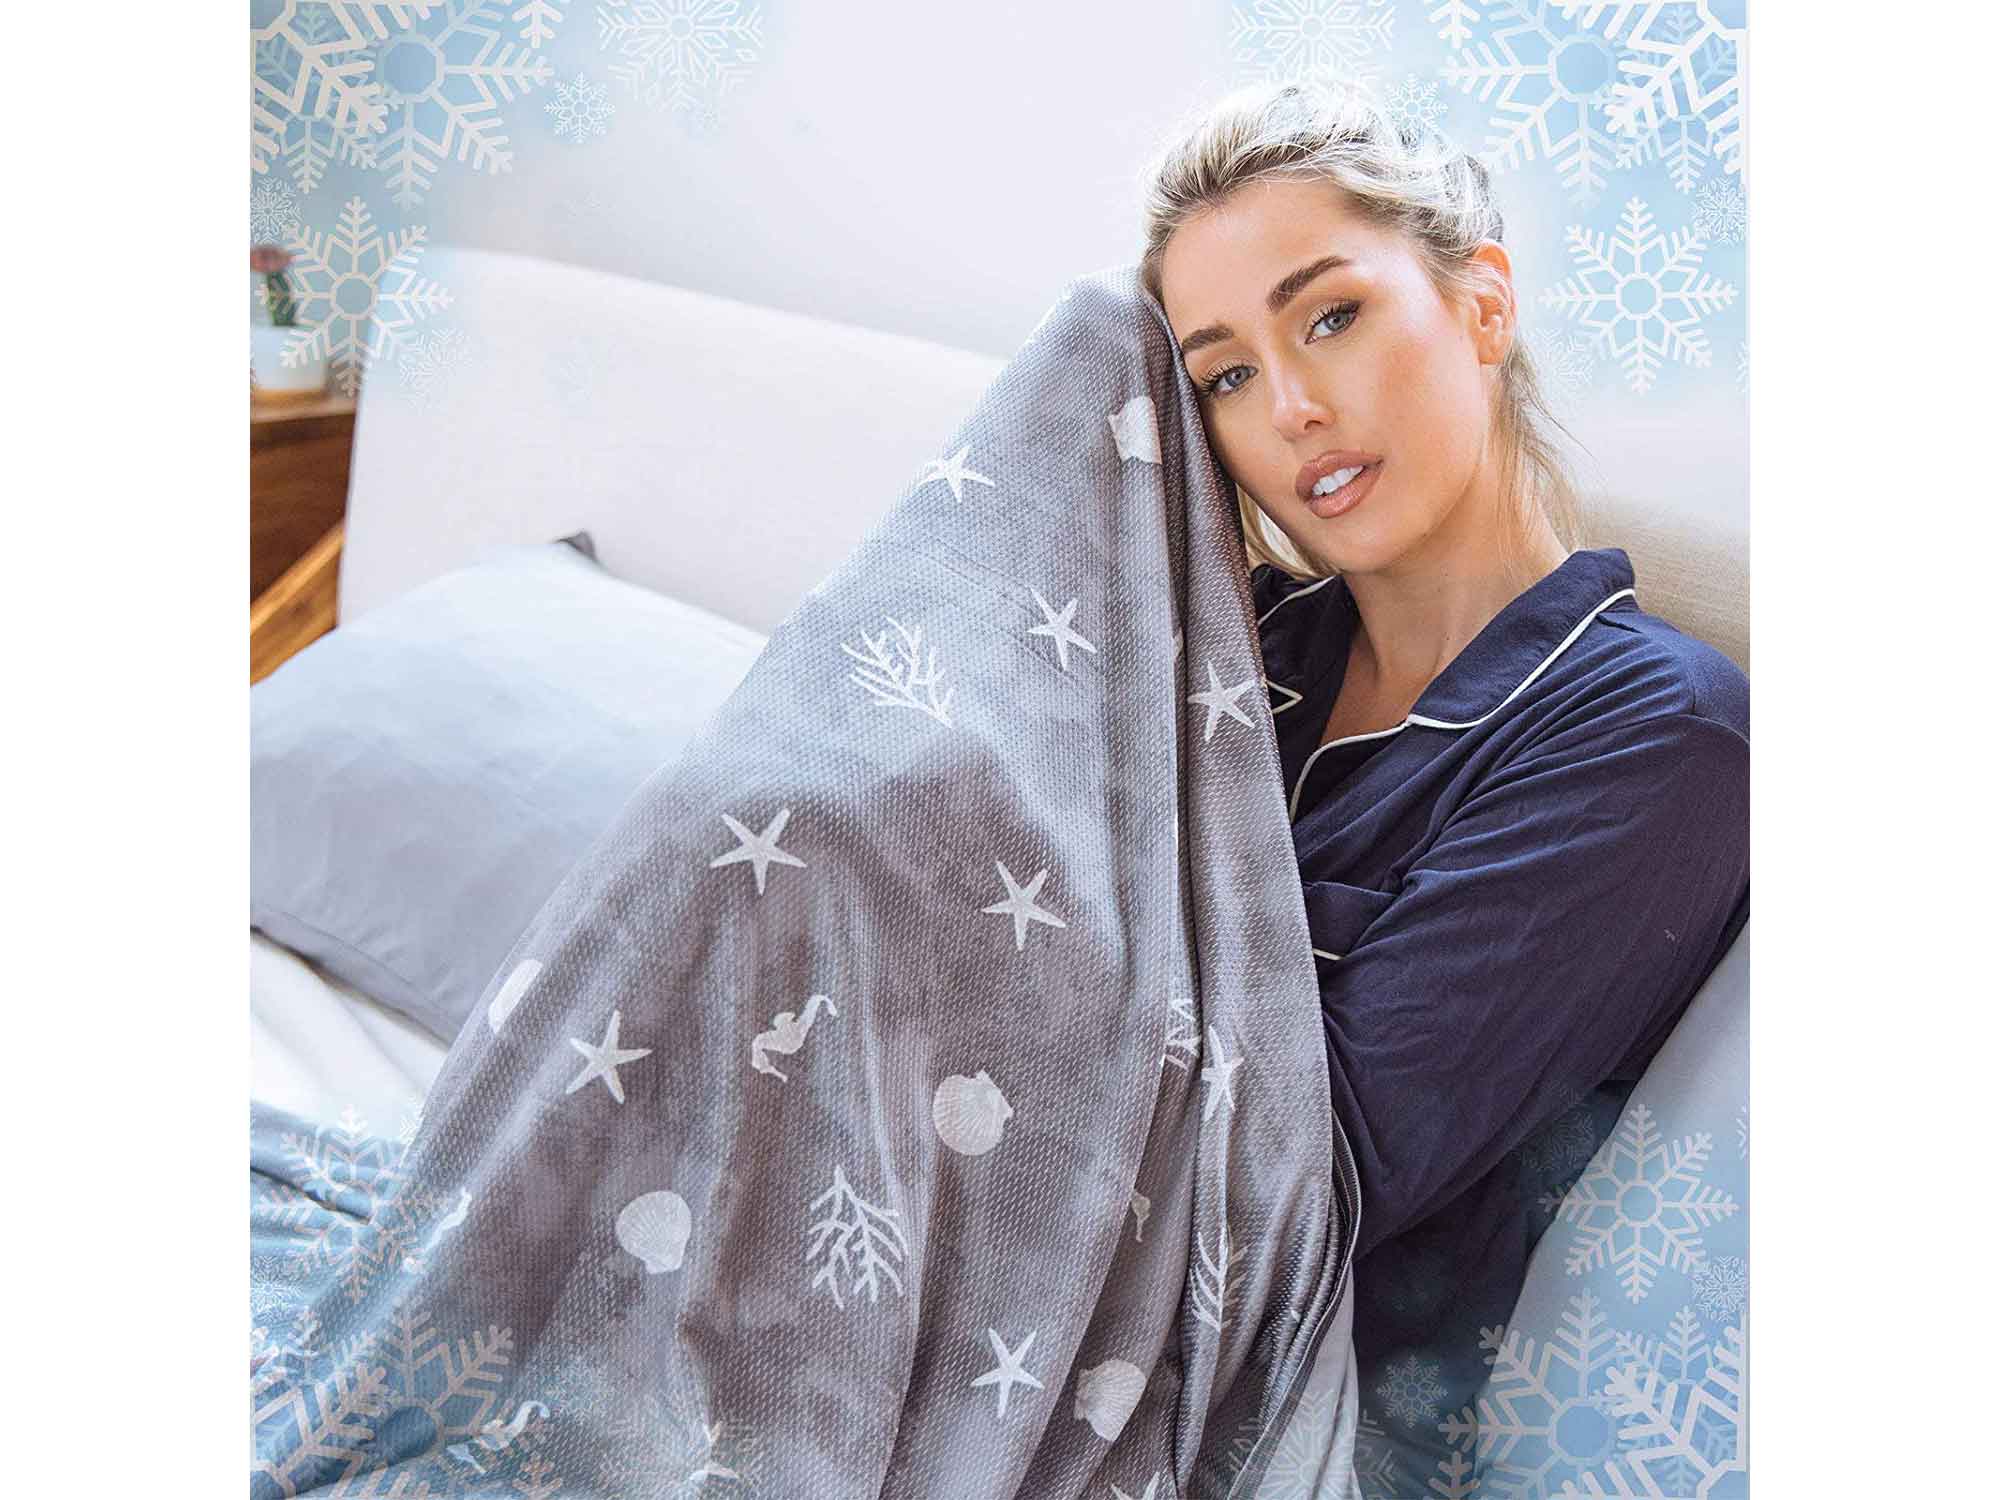 Cooling Blanket with Double Sided Cold, Queen Size Big Oversized Bed Blankets, Lightweight Breathable Summer Coastal Beach Theme Blanket, Transfer Heat for Hot Sleepers Night Sweats, with Travel Bag